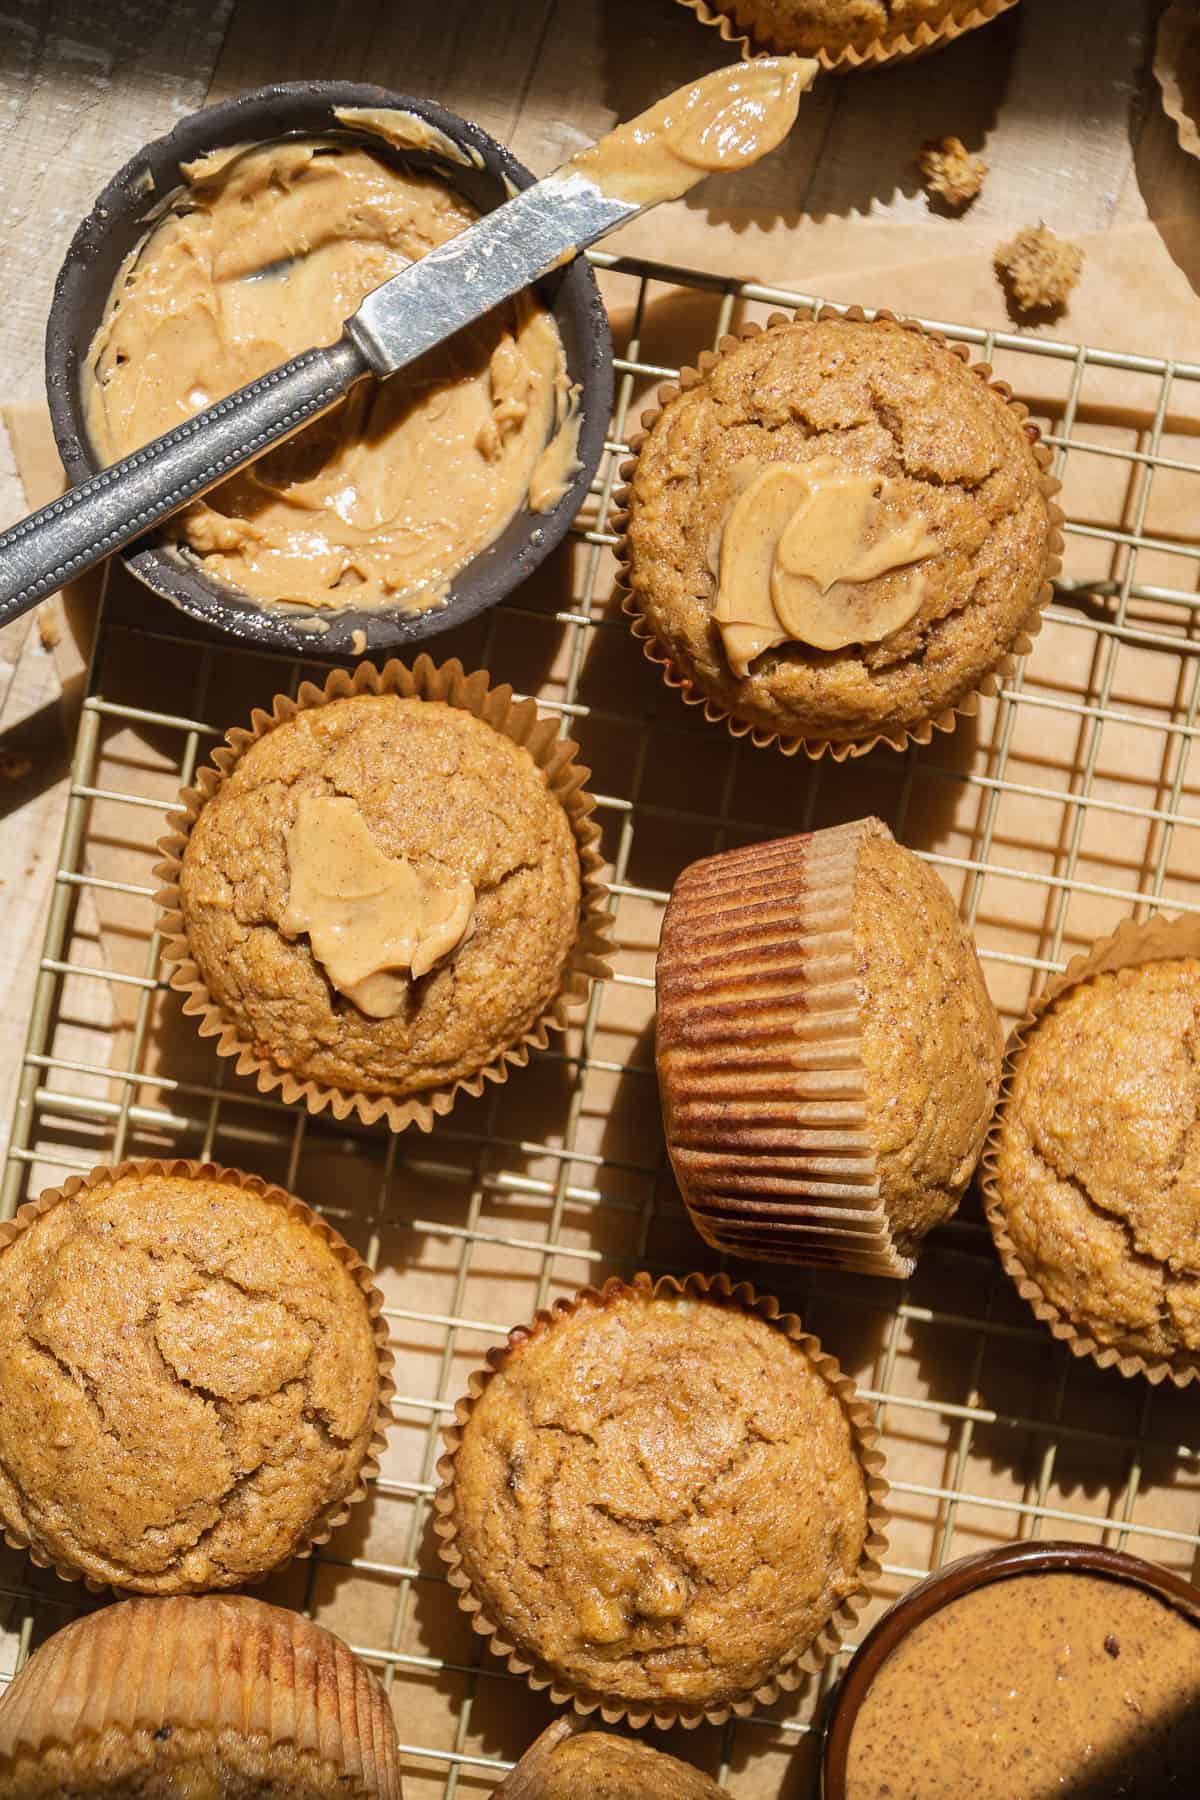 Peanut butter banana almond flour muffins scattered on a wooden surface.